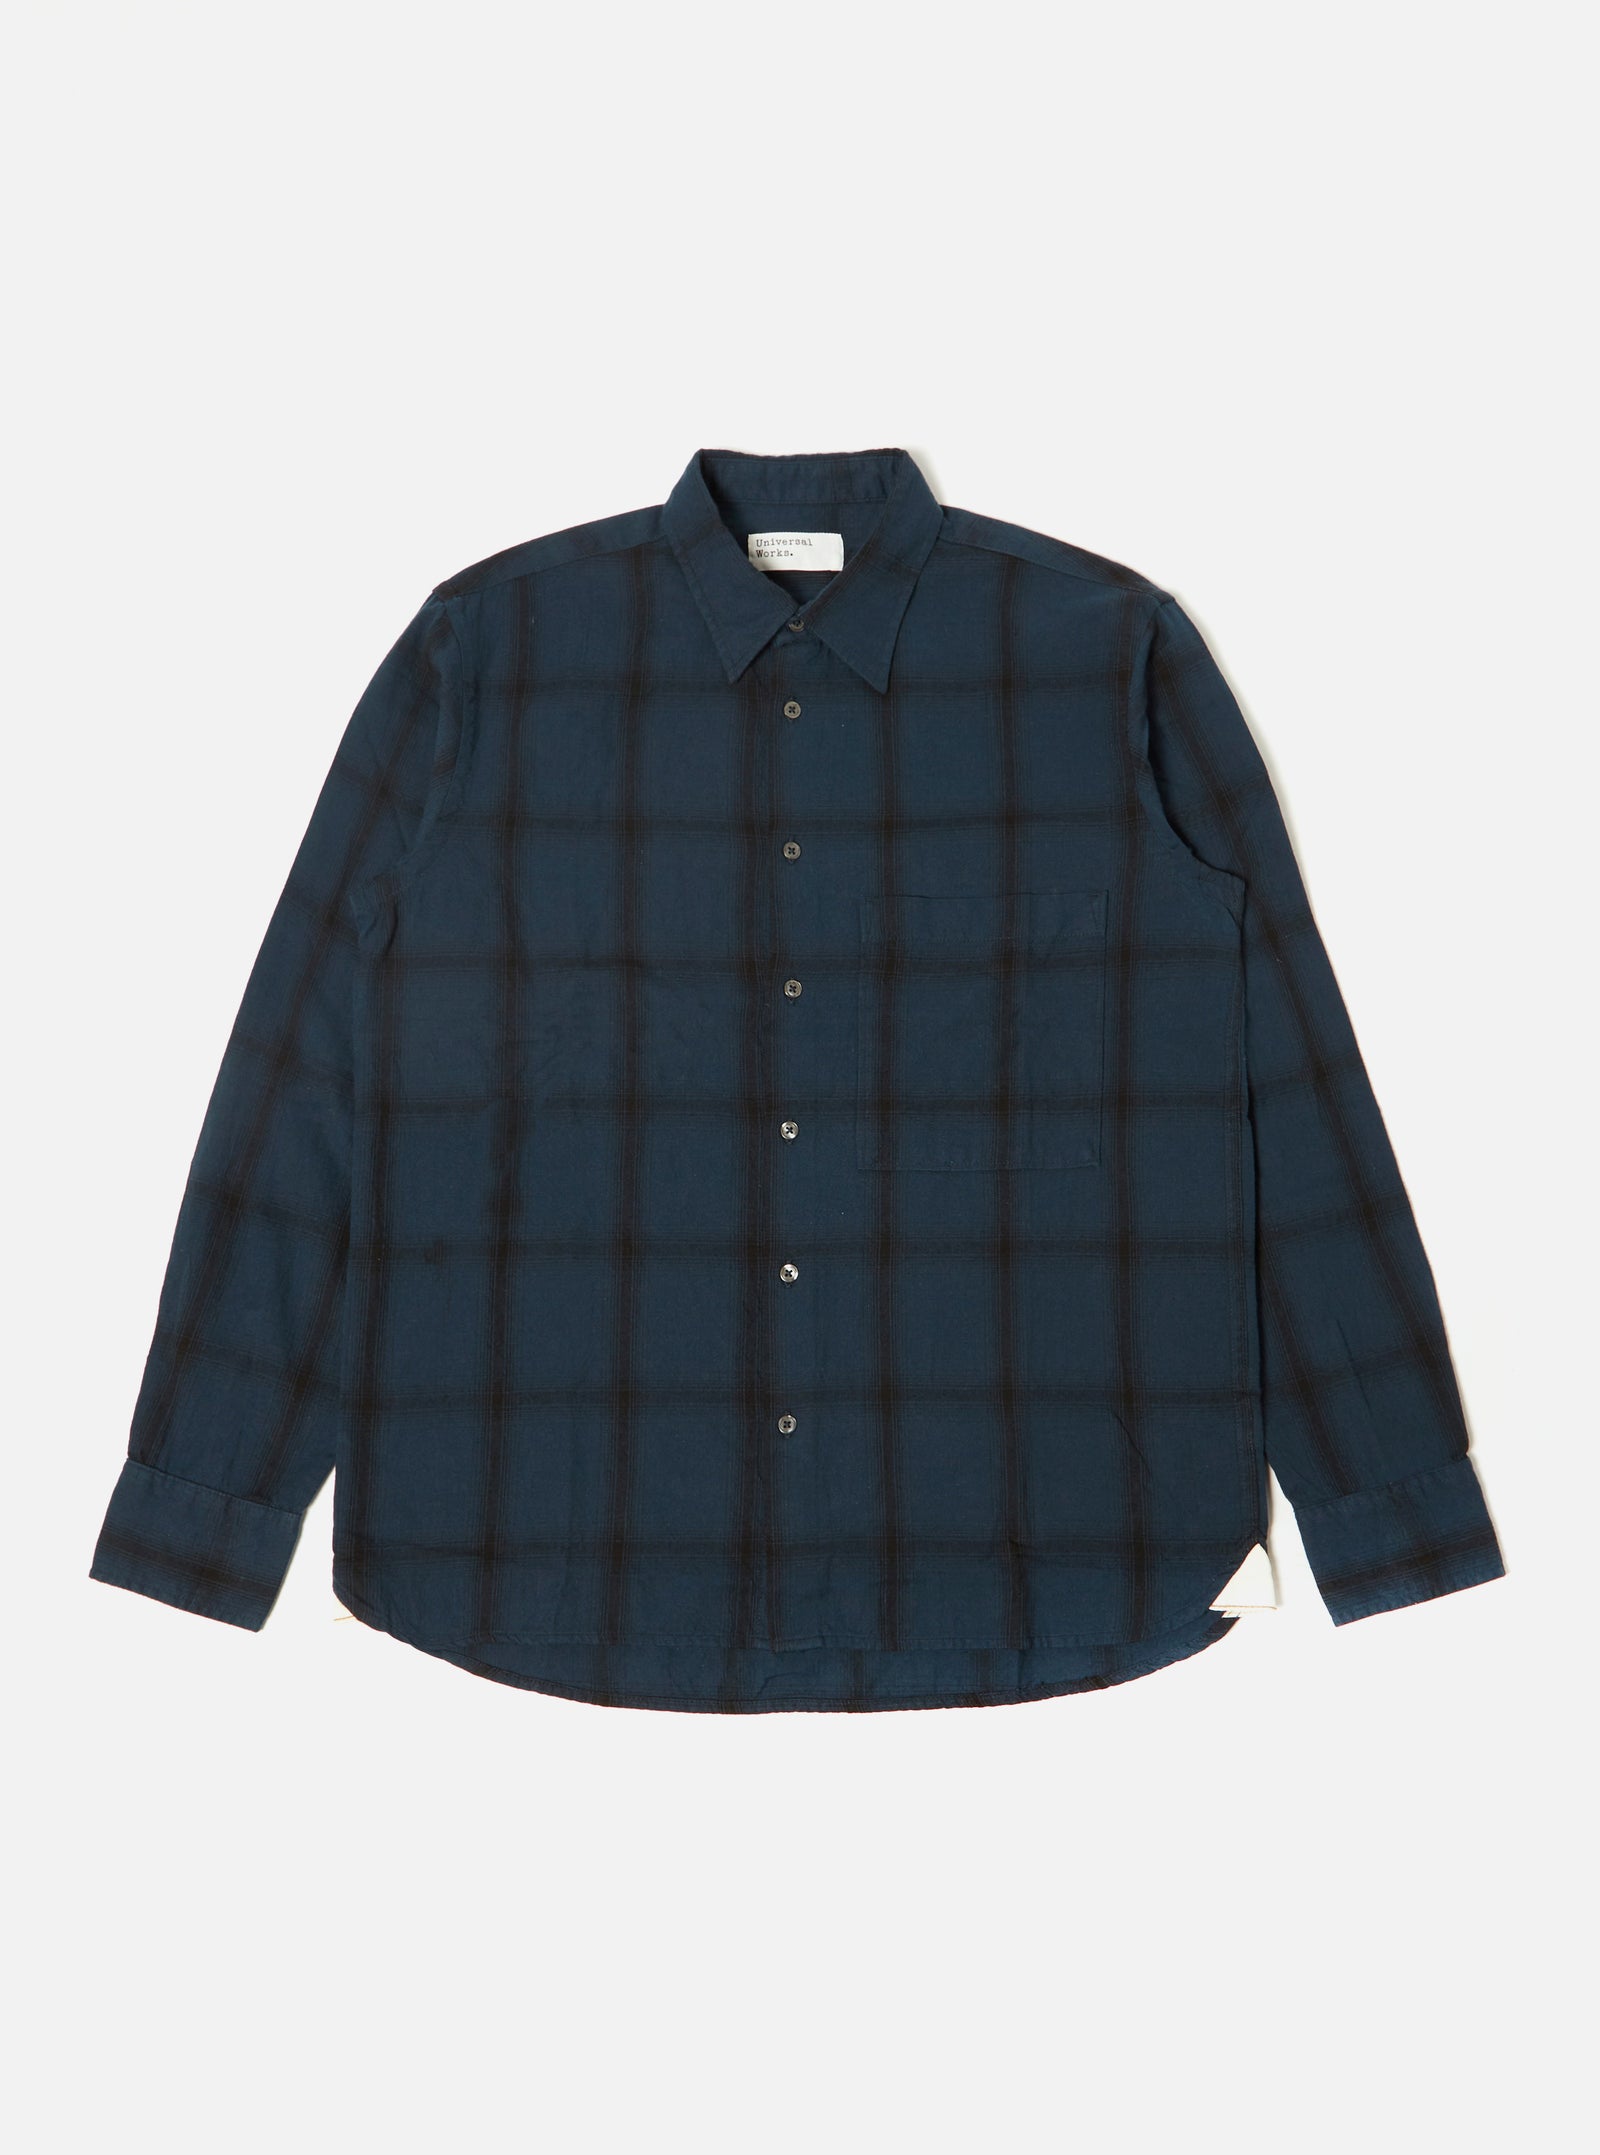 Universal Works Square Pocket Shirt in Navy Shadow Check